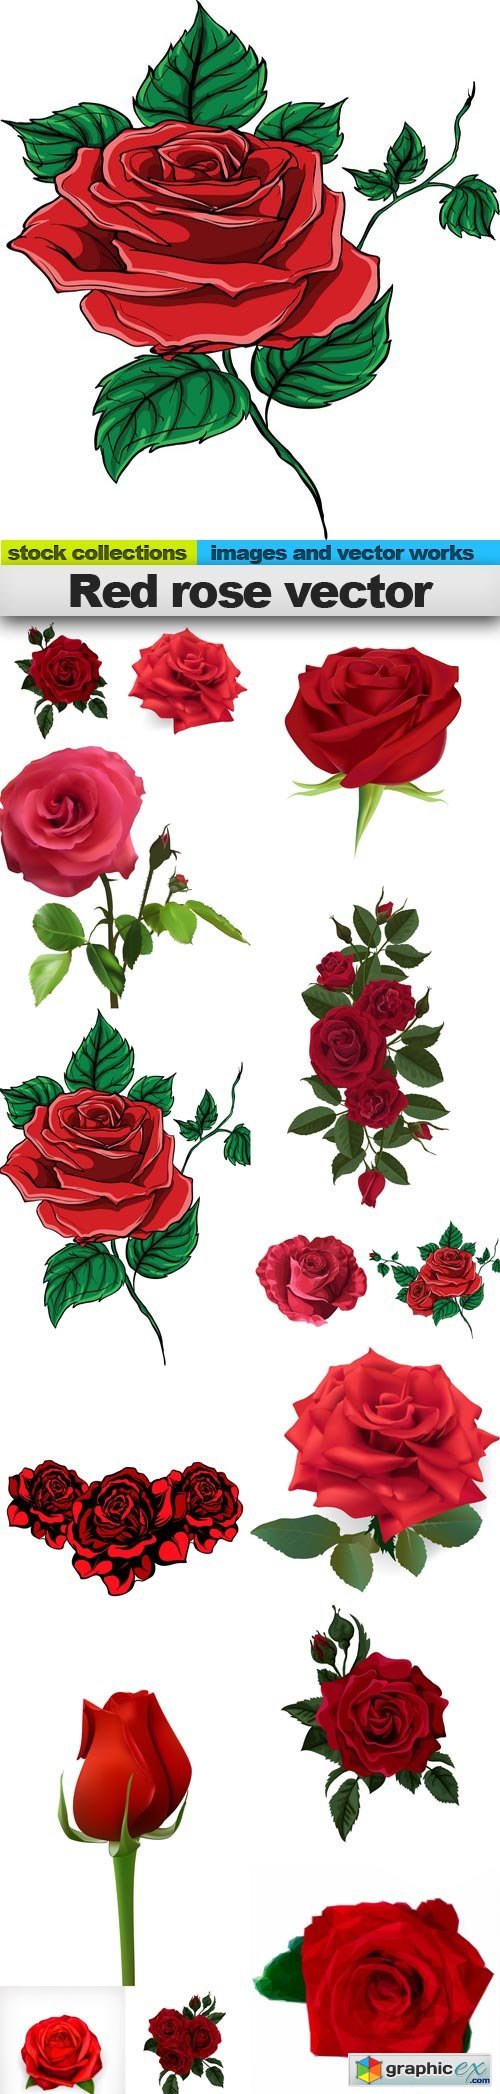 Red rose vector, 15 x EPS